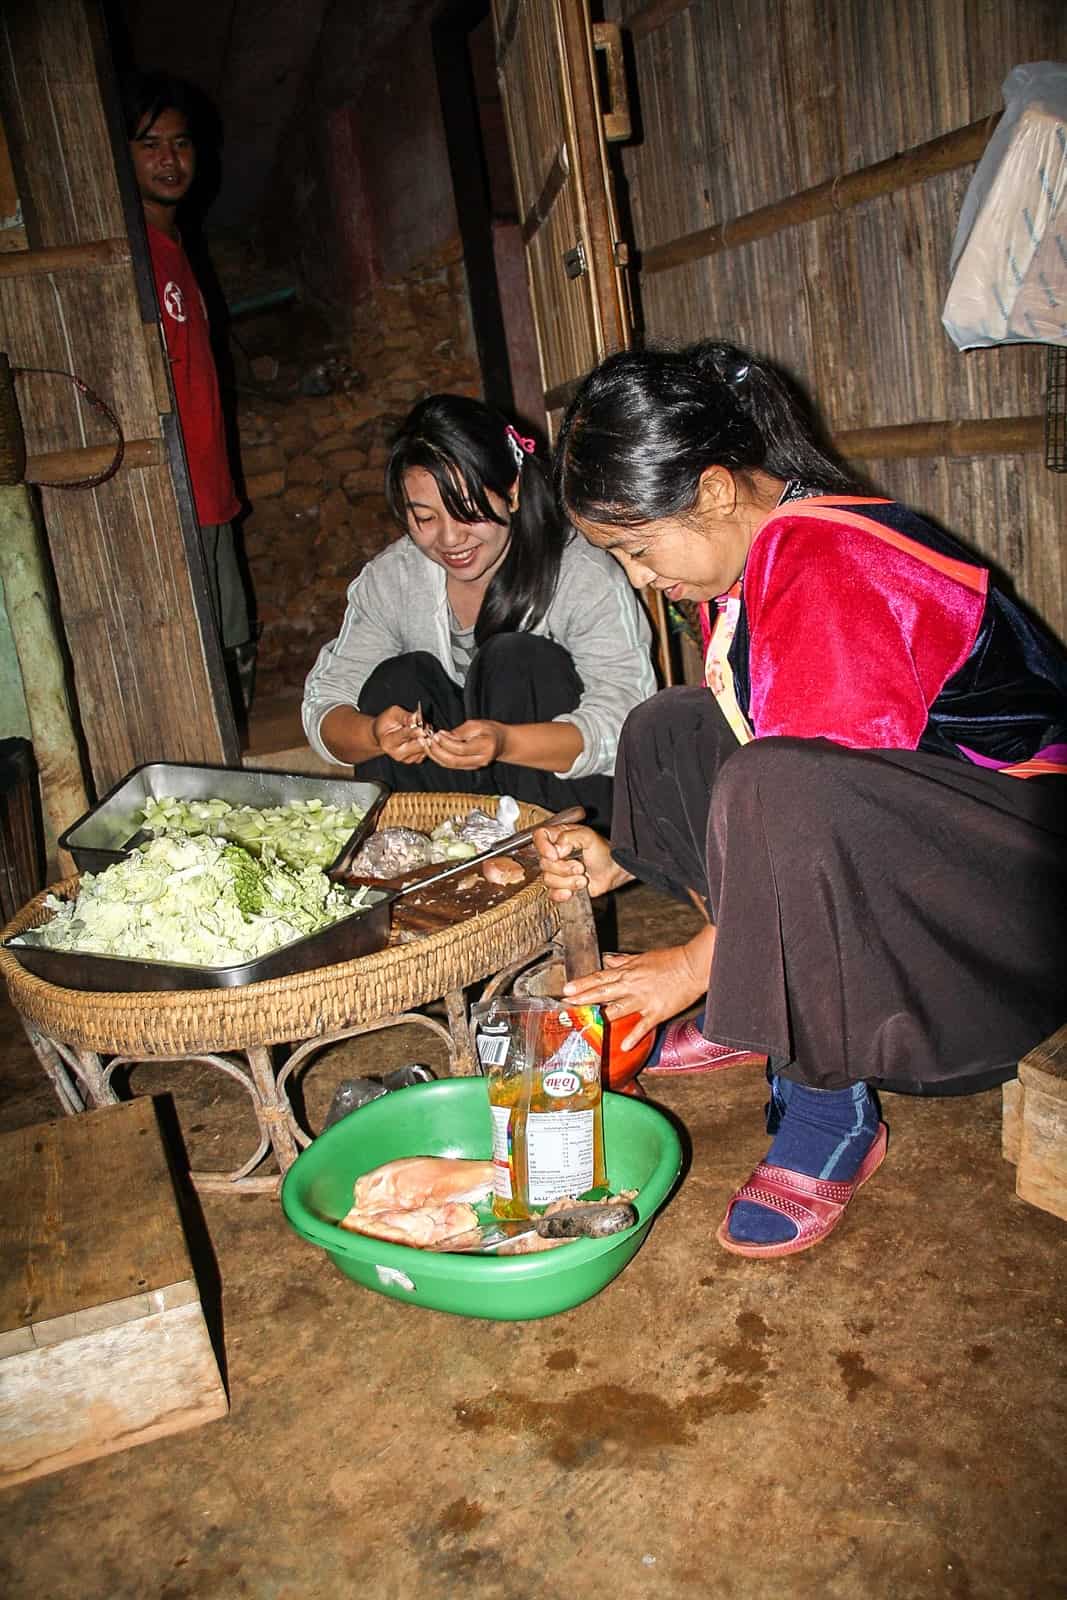 A man looks towards two Thai women crouched and cooking a meal with vegetables and meat in a wooden house. 